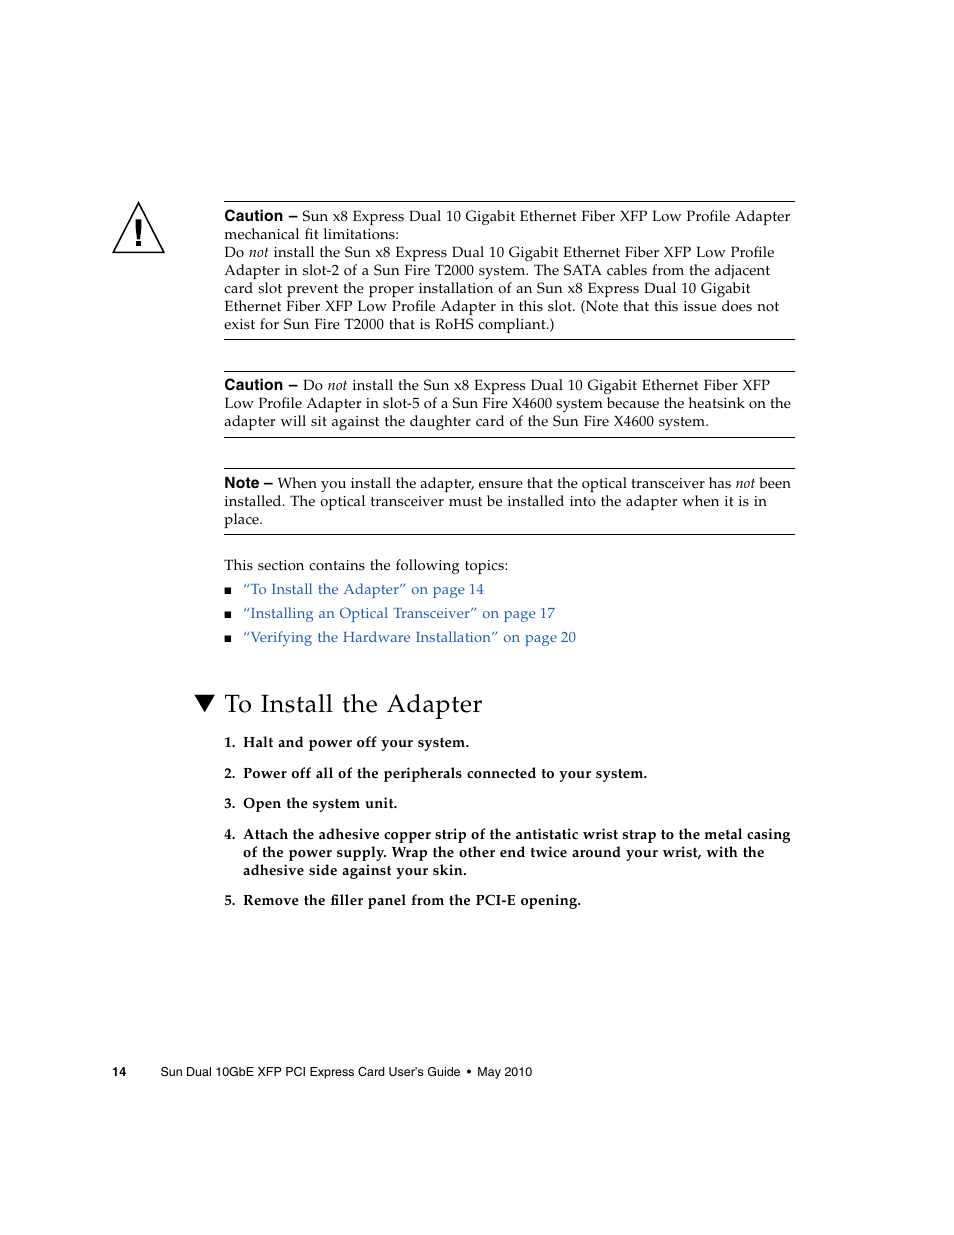 To install the adapter | Oracle Audio Technologies Sun Oracle SunDual 10GbE XFP User Manual | Page 24 / 86